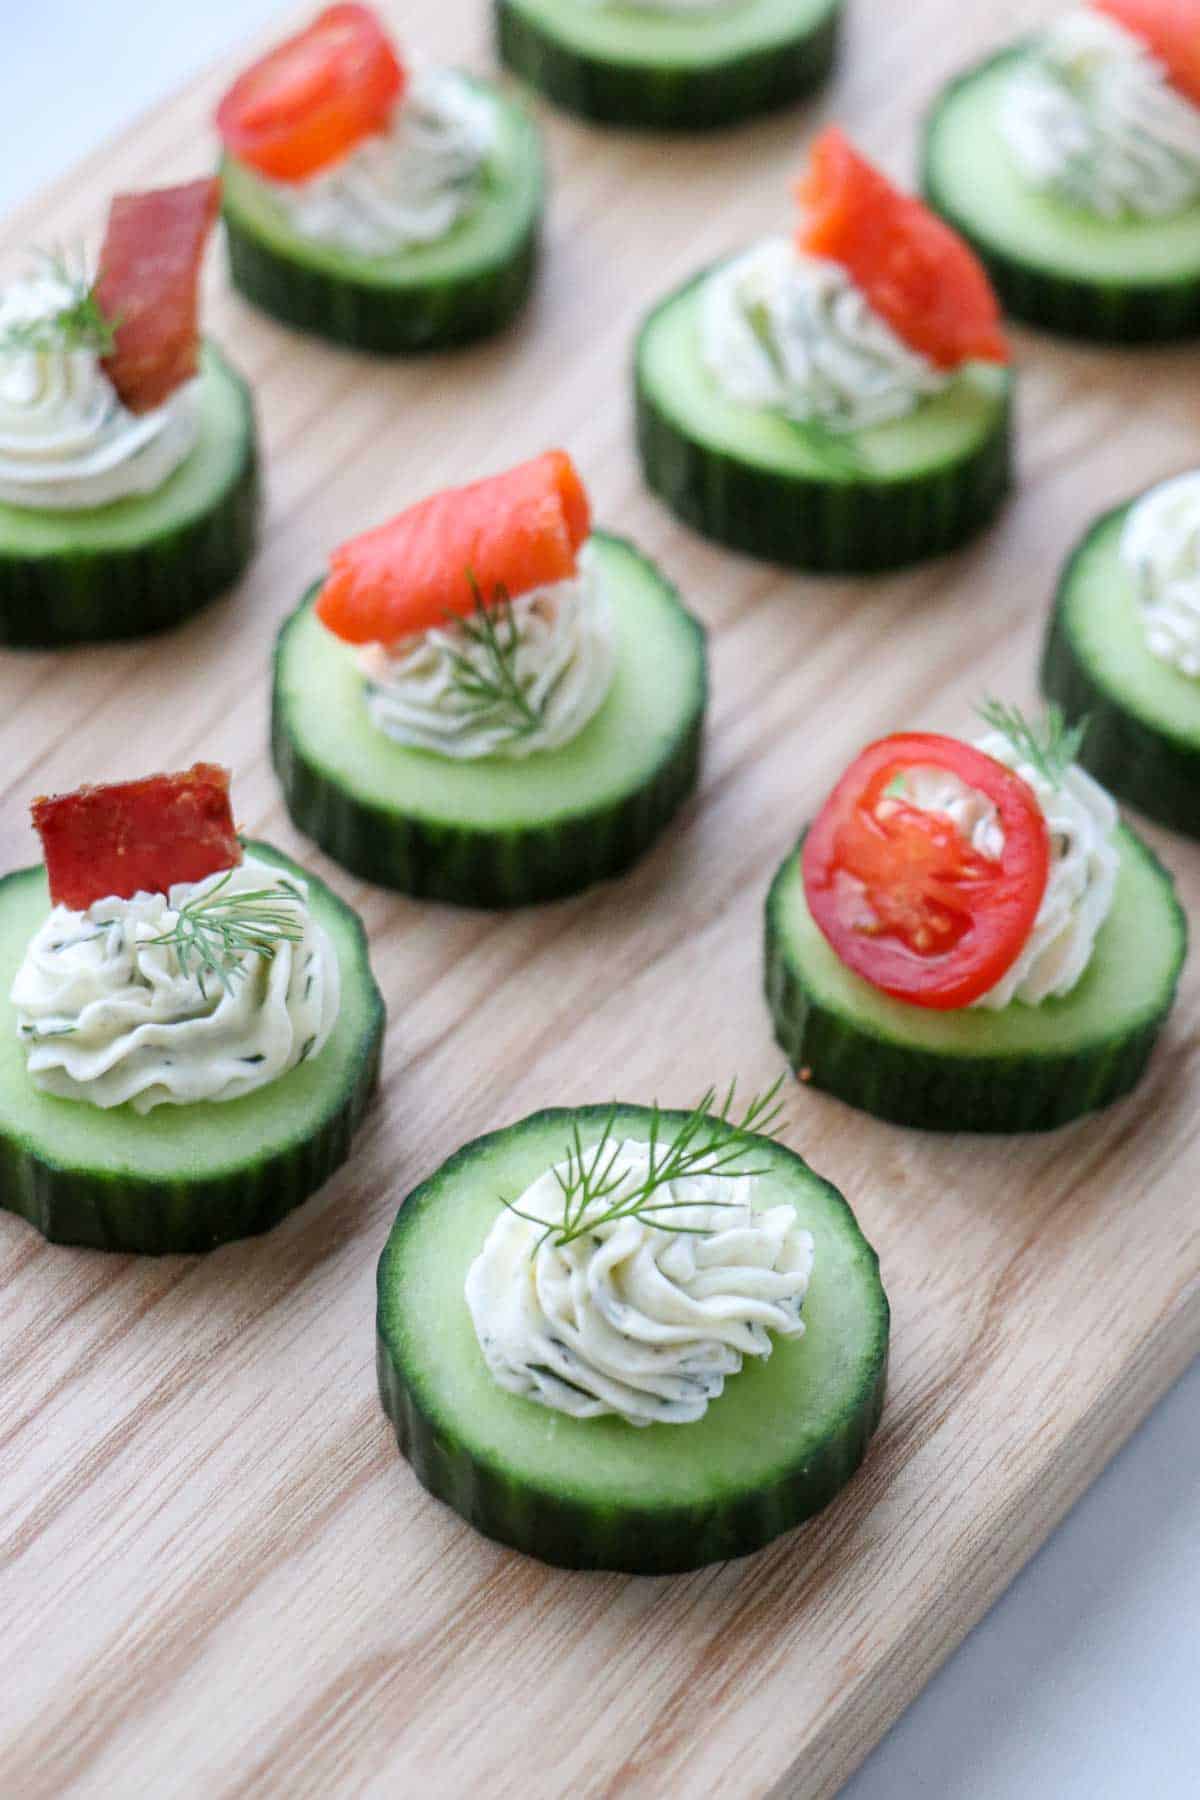 Cucumbers topped with cream cheese, dill, bacon, smoked salmon and tomato on a wooden board.